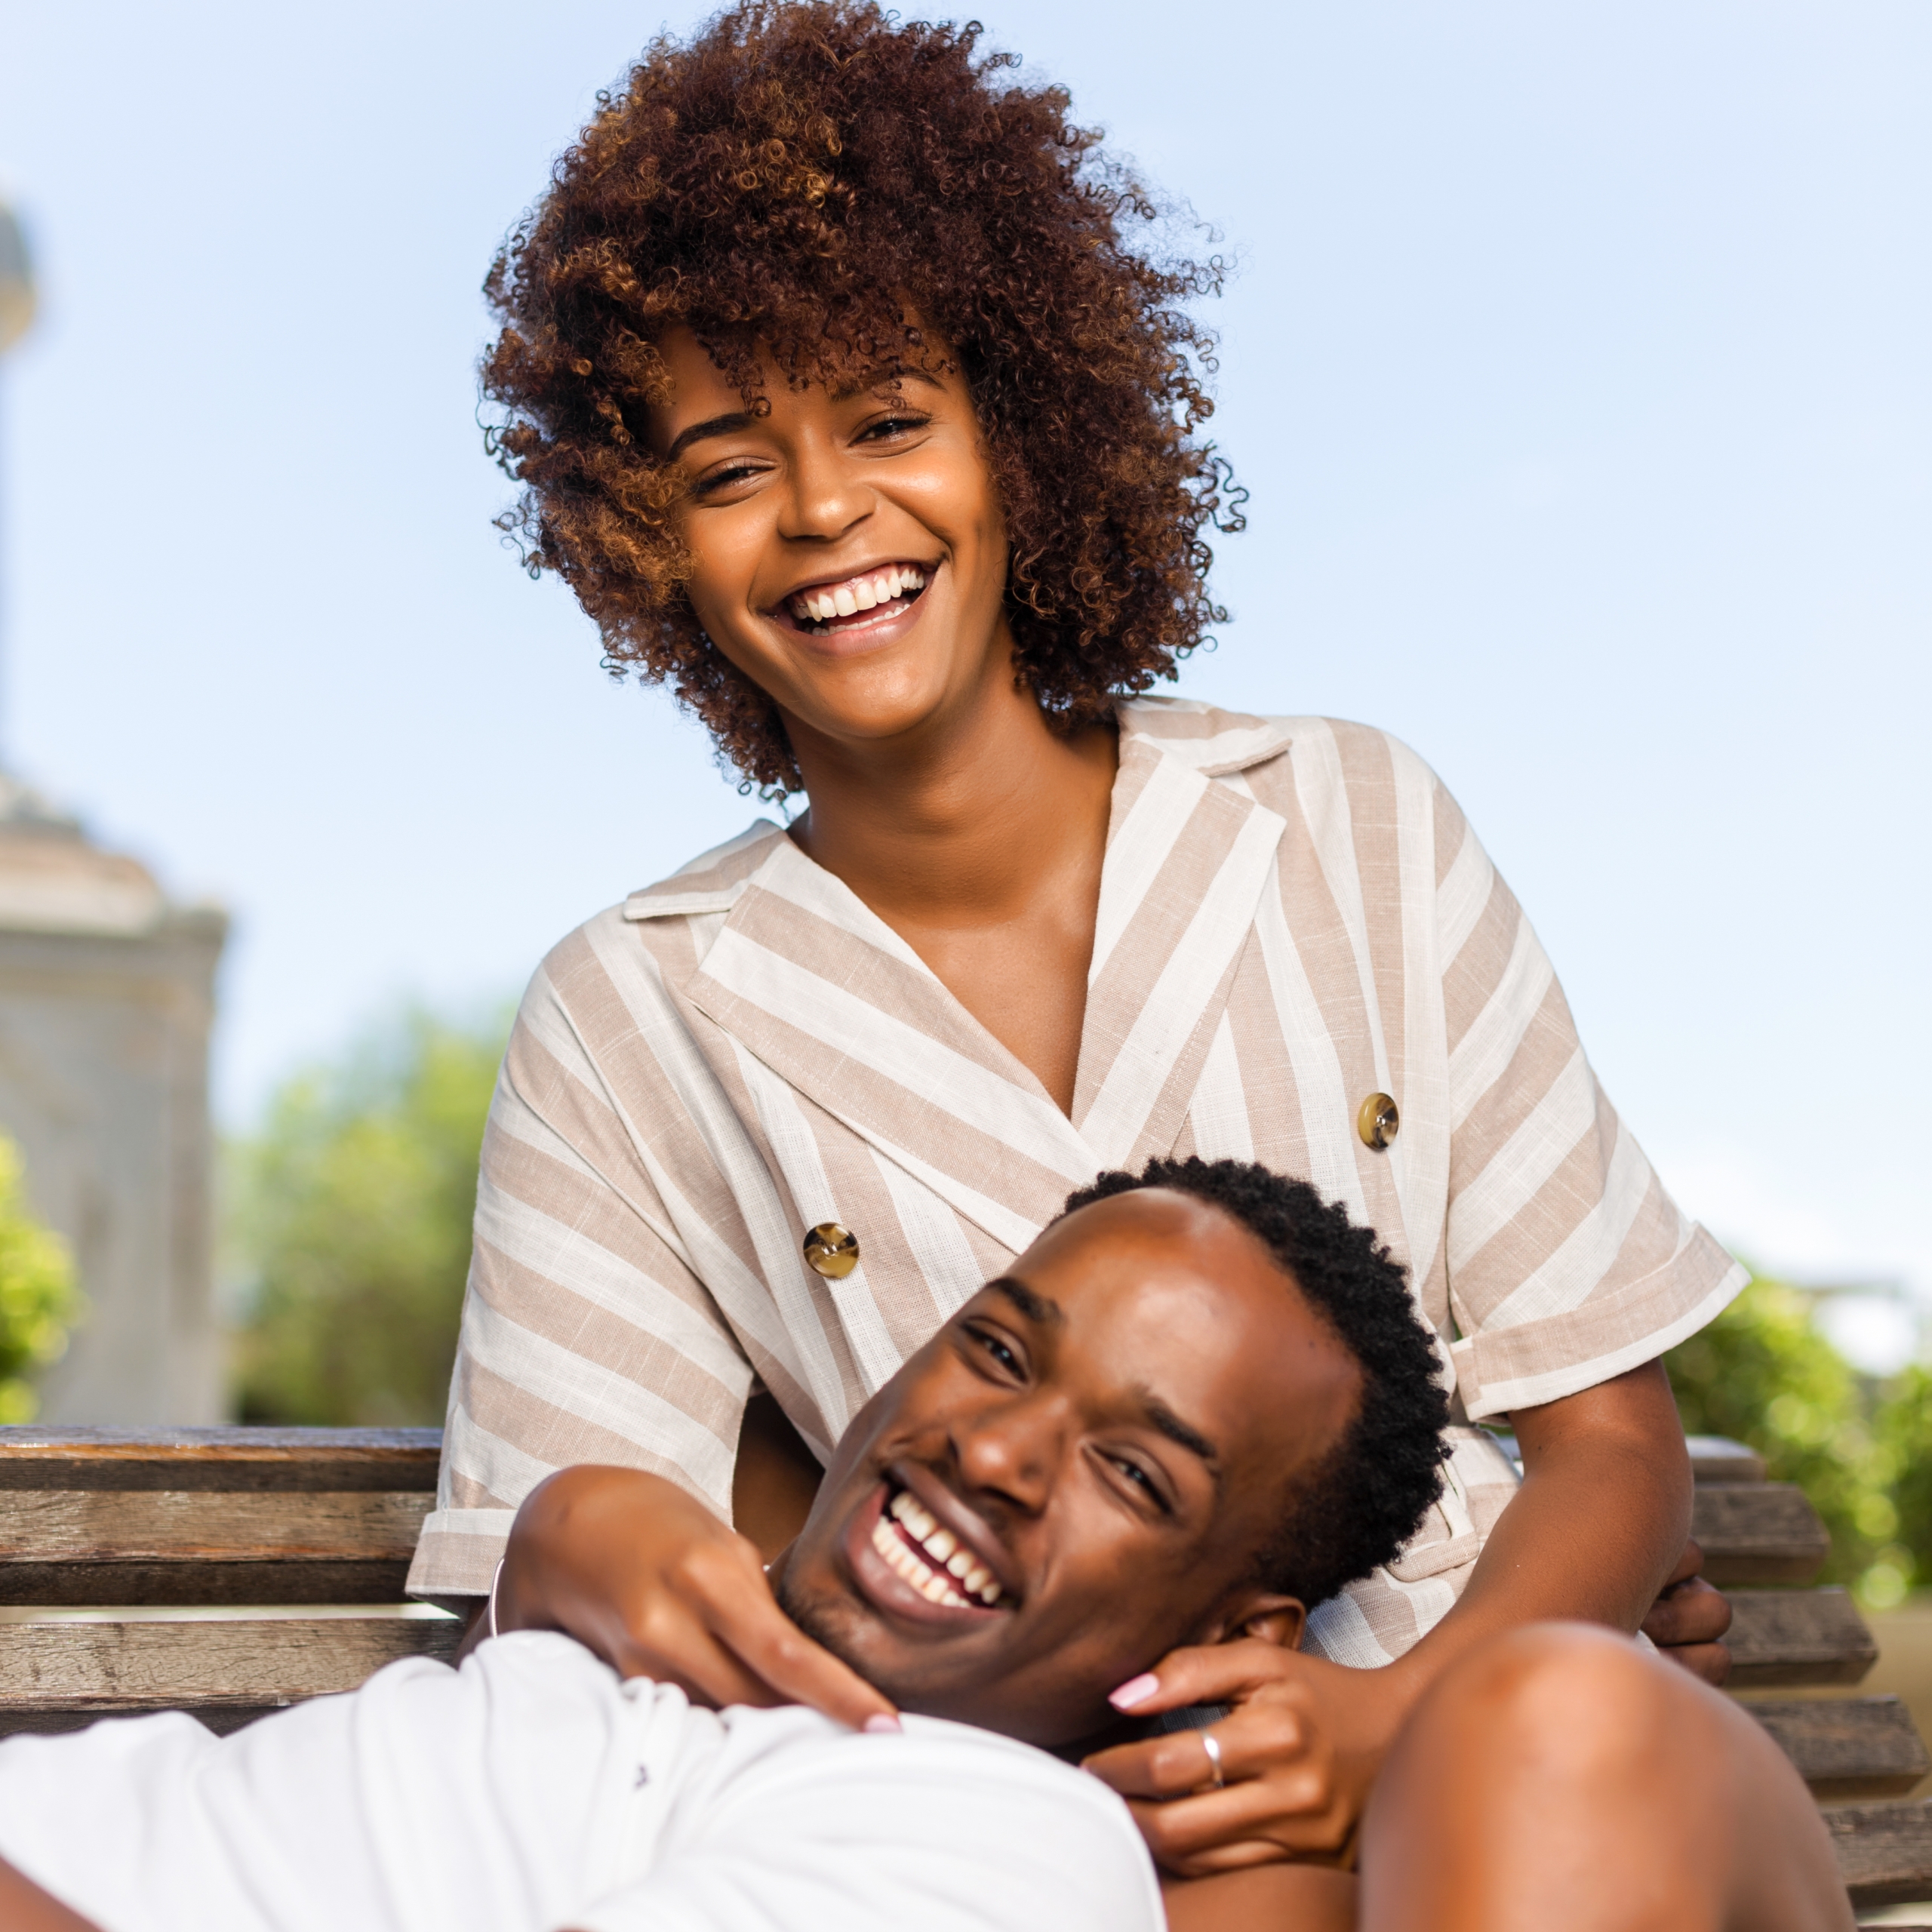 Outdoor protrait of black african american couple embracing each other